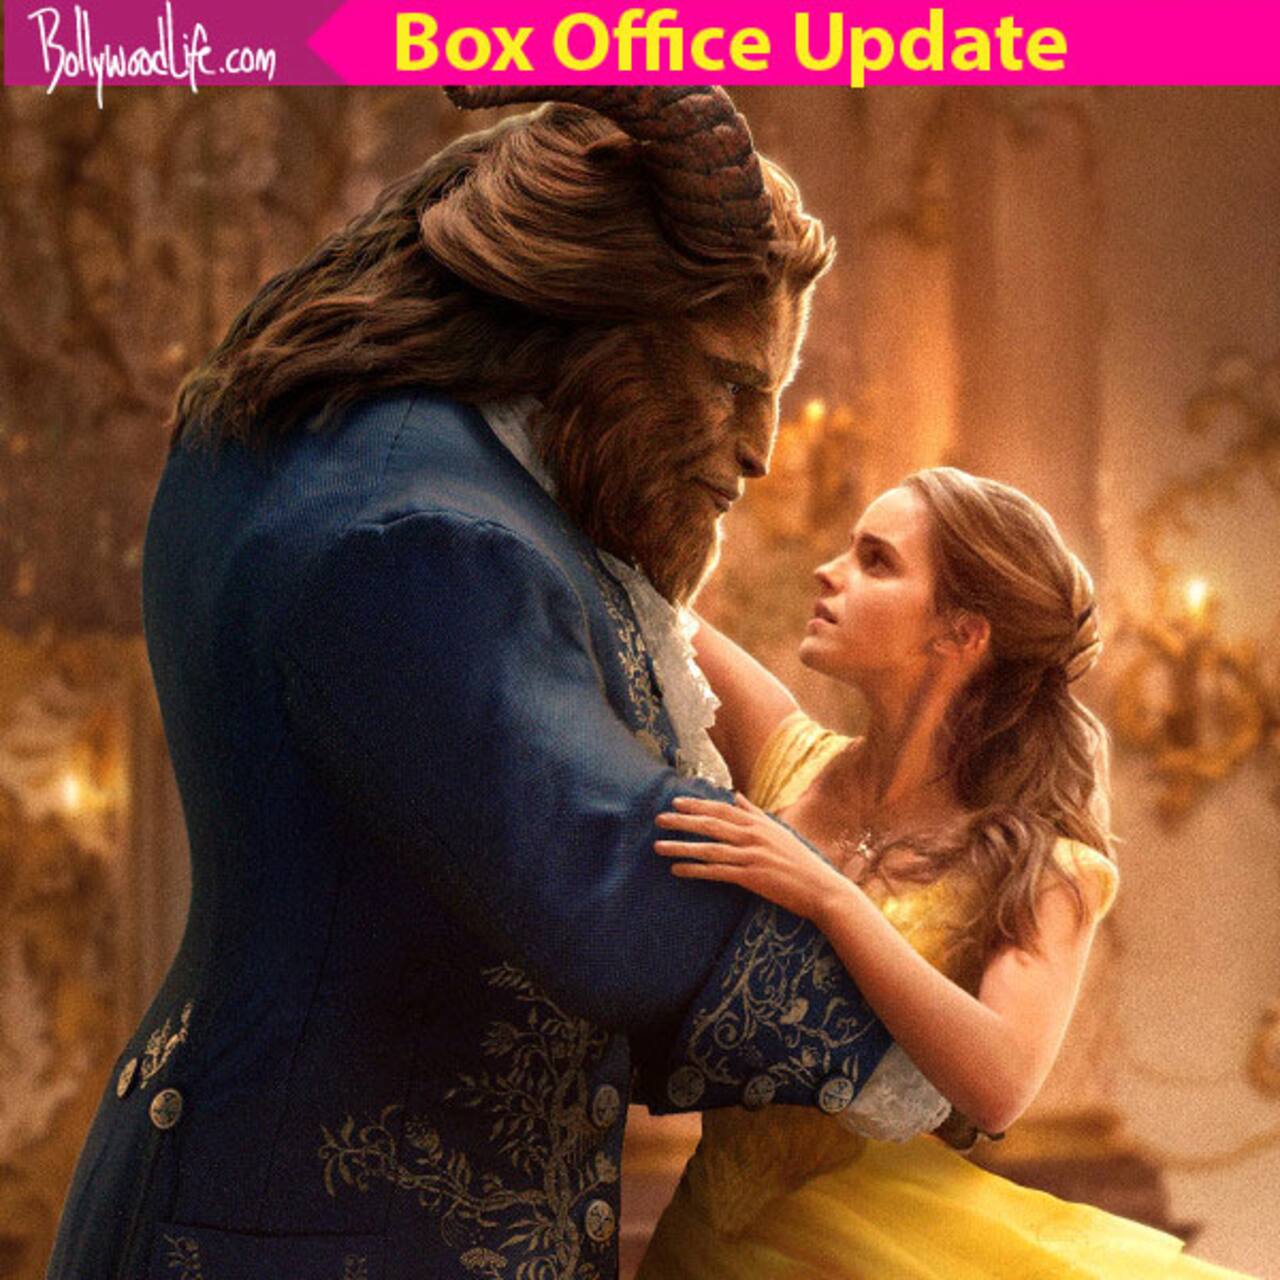 Beauty And The Beast box office collection day 3: Emma Watson's movie has a decent first weekend; earns Rs 6.67 crore